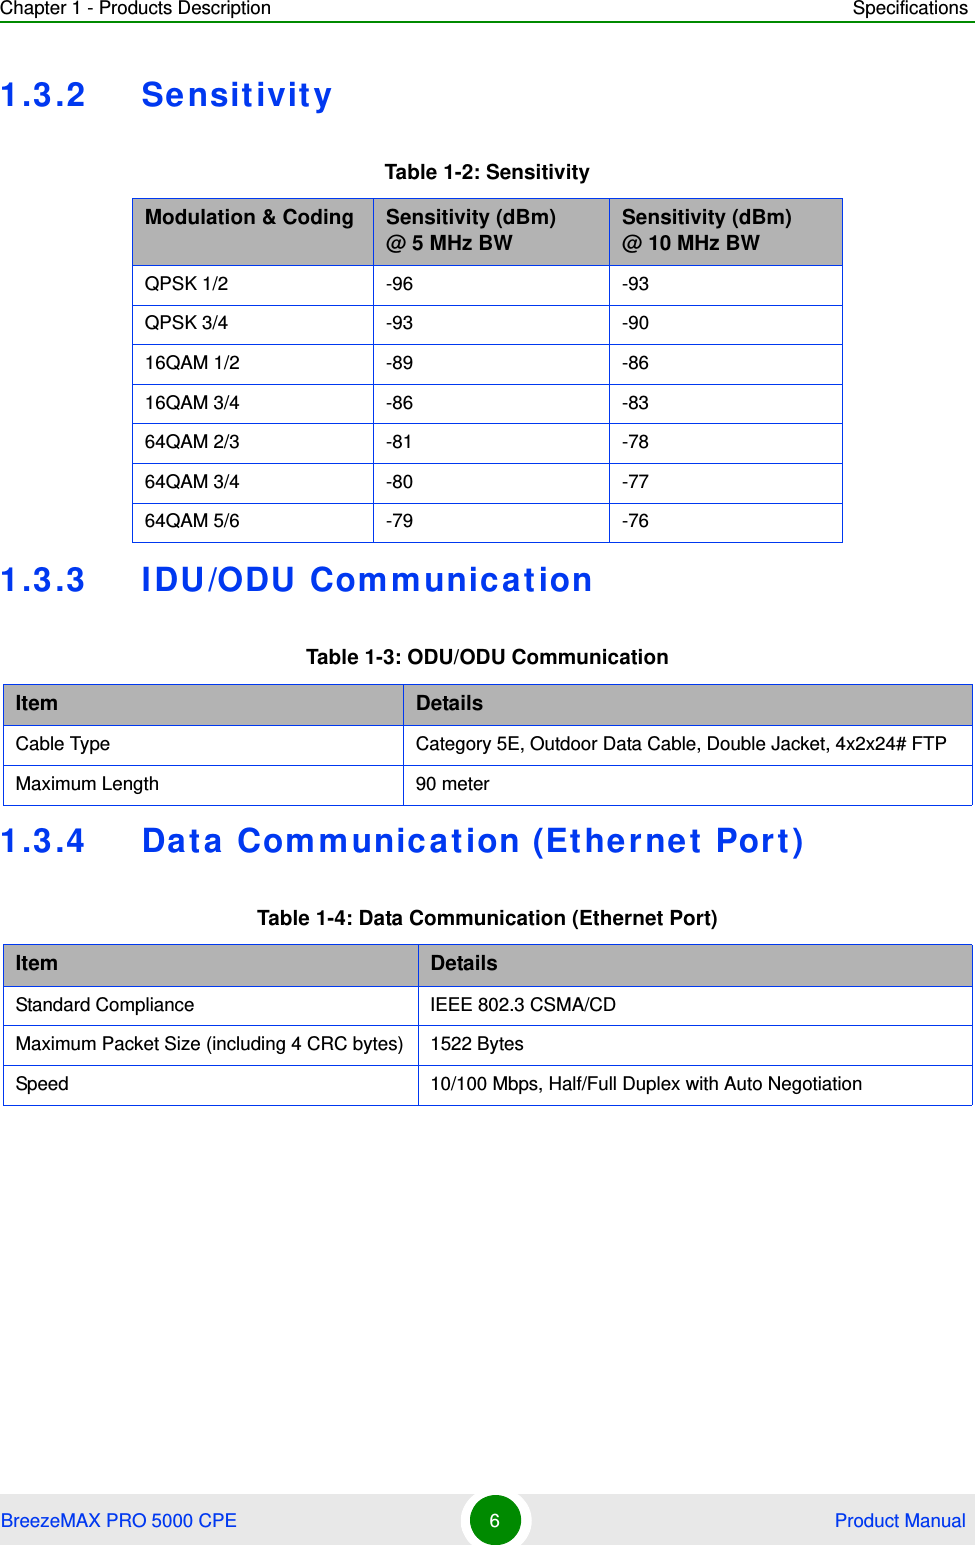 Chapter 1 - Products Description SpecificationsBreezeMAX PRO 5000 CPE 6 Product Manual1.3.2 Sensitivity1.3.3 IDU/ODU Communication1.3.4 Data Communication (Ethernet Port)Table 1-2: SensitivityModulation &amp; Coding Sensitivity (dBm)@ 5 MHz BW Sensitivity (dBm)@ 10 MHz BWQPSK 1/2 -96 -93QPSK 3/4 -93 -9016QAM 1/2 -89 -8616QAM 3/4 -86 -8364QAM 2/3 -81 -7864QAM 3/4 -80 -7764QAM 5/6 -79 -76Table 1-3: ODU/ODU CommunicationItem DetailsCable Type Category 5E, Outdoor Data Cable, Double Jacket, 4x2x24# FTPMaximum Length 90 meter Table 1-4: Data Communication (Ethernet Port)Item DetailsStandard Compliance IEEE 802.3 CSMA/CDMaximum Packet Size (including 4 CRC bytes) 1522 BytesSpeed 10/100 Mbps, Half/Full Duplex with Auto Negotiation